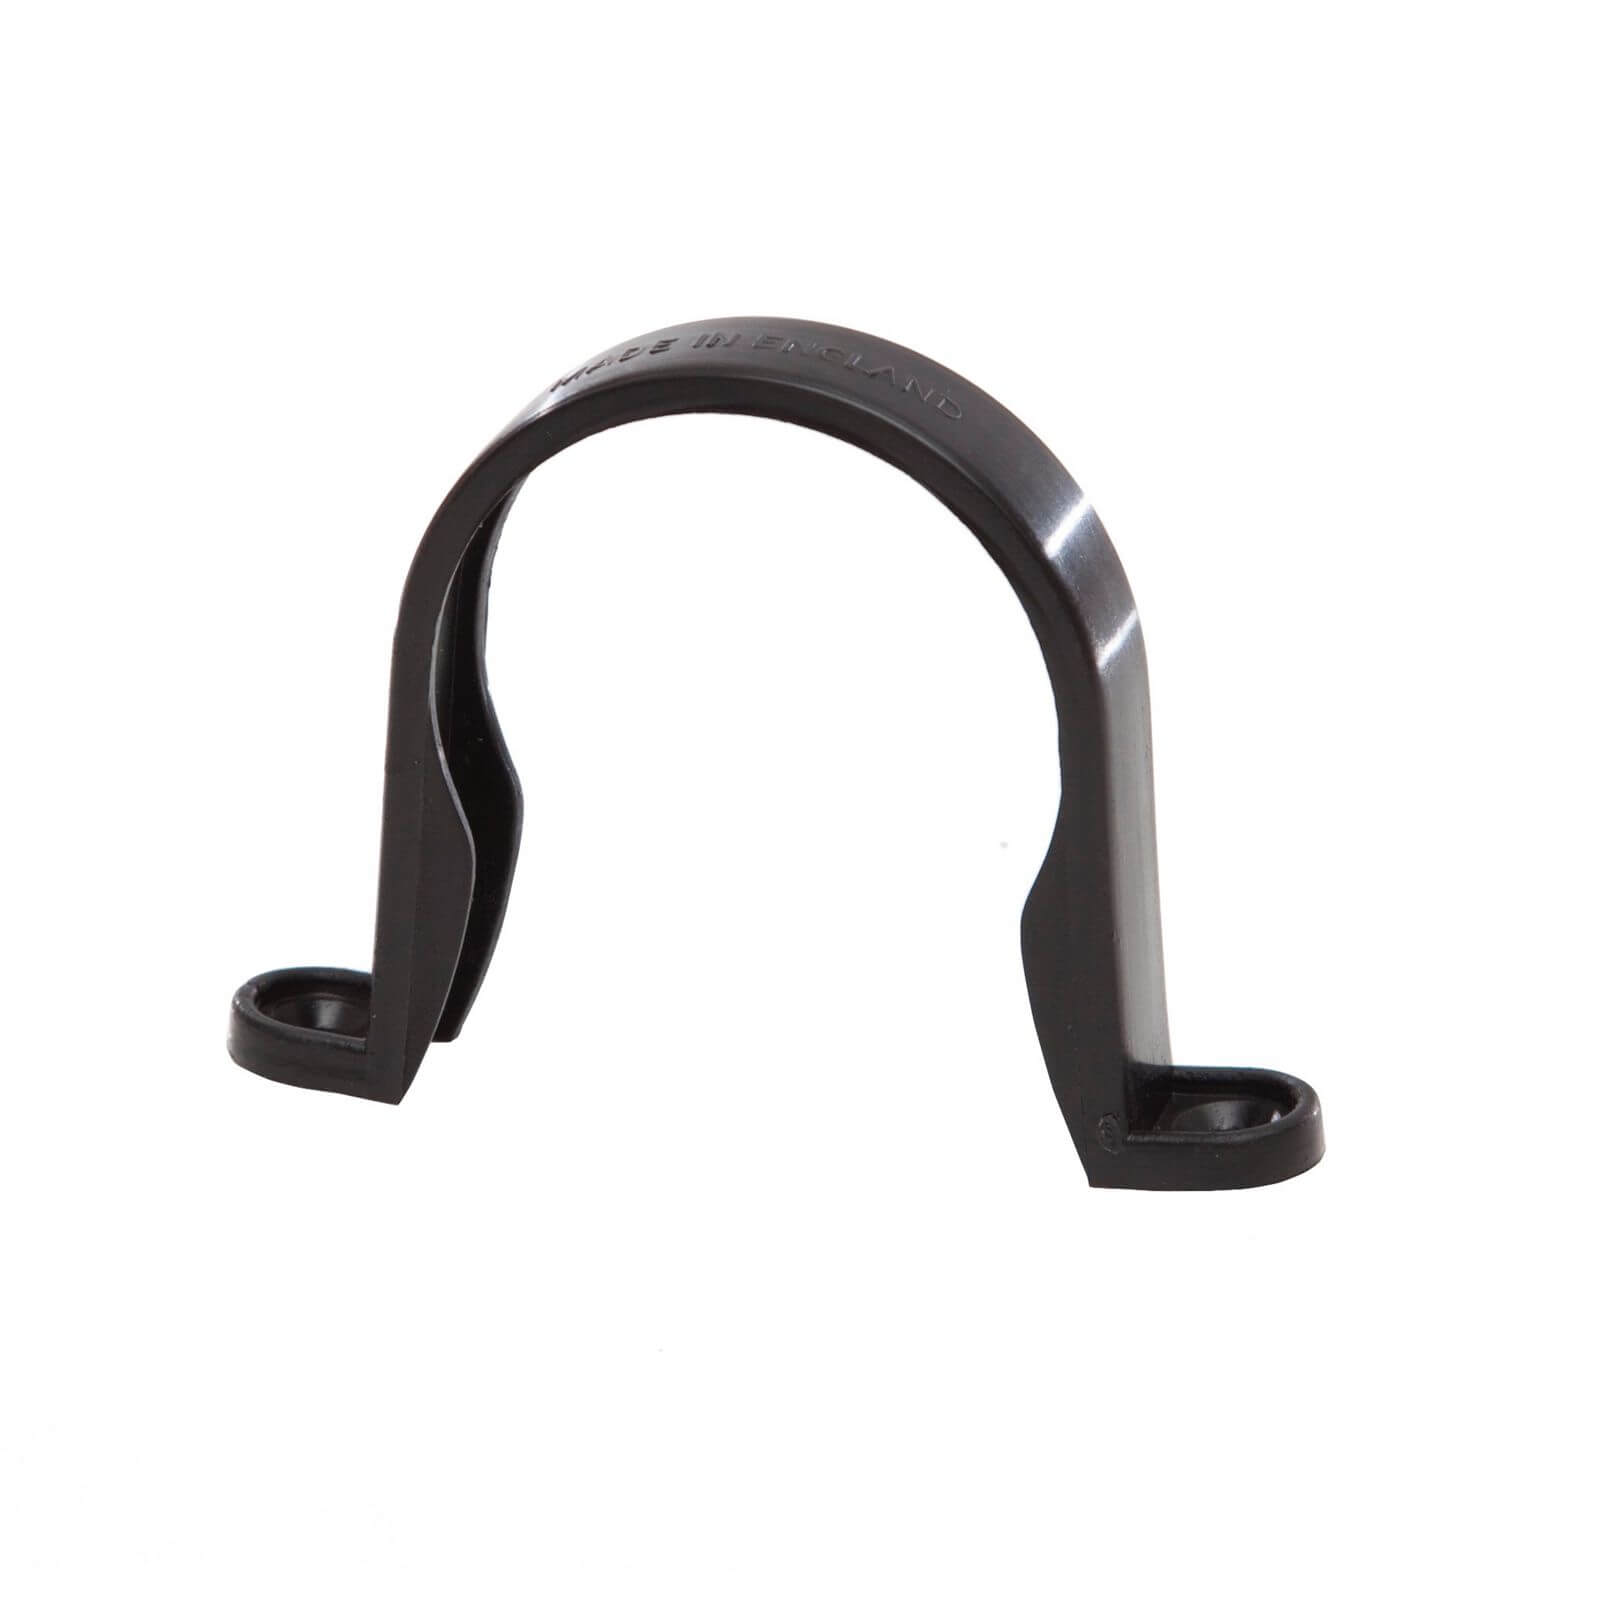 Polypipe Round Downpipe Bracket - 50mm - Black